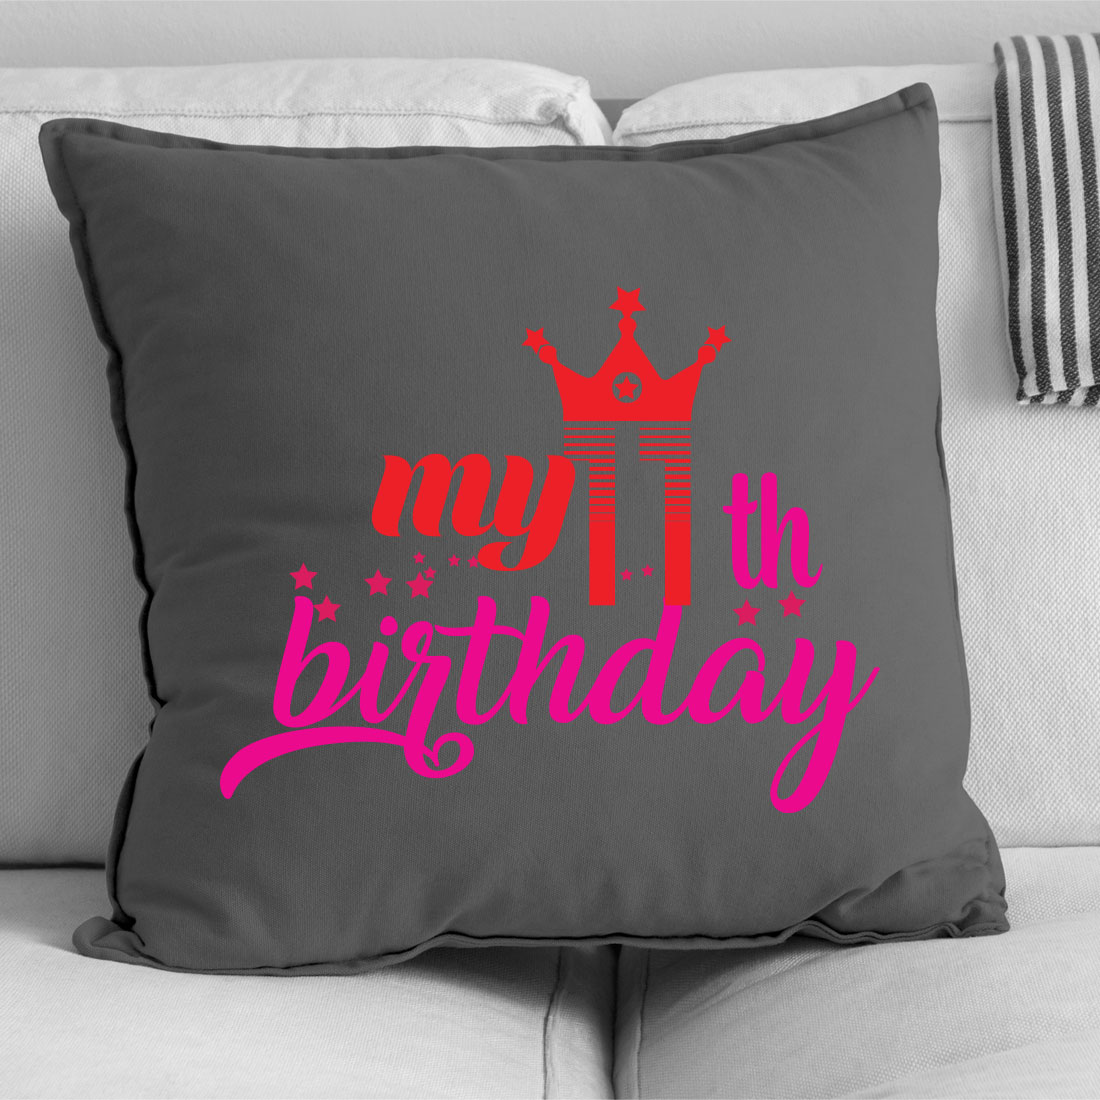 Gray pillow with pink lettering on it.